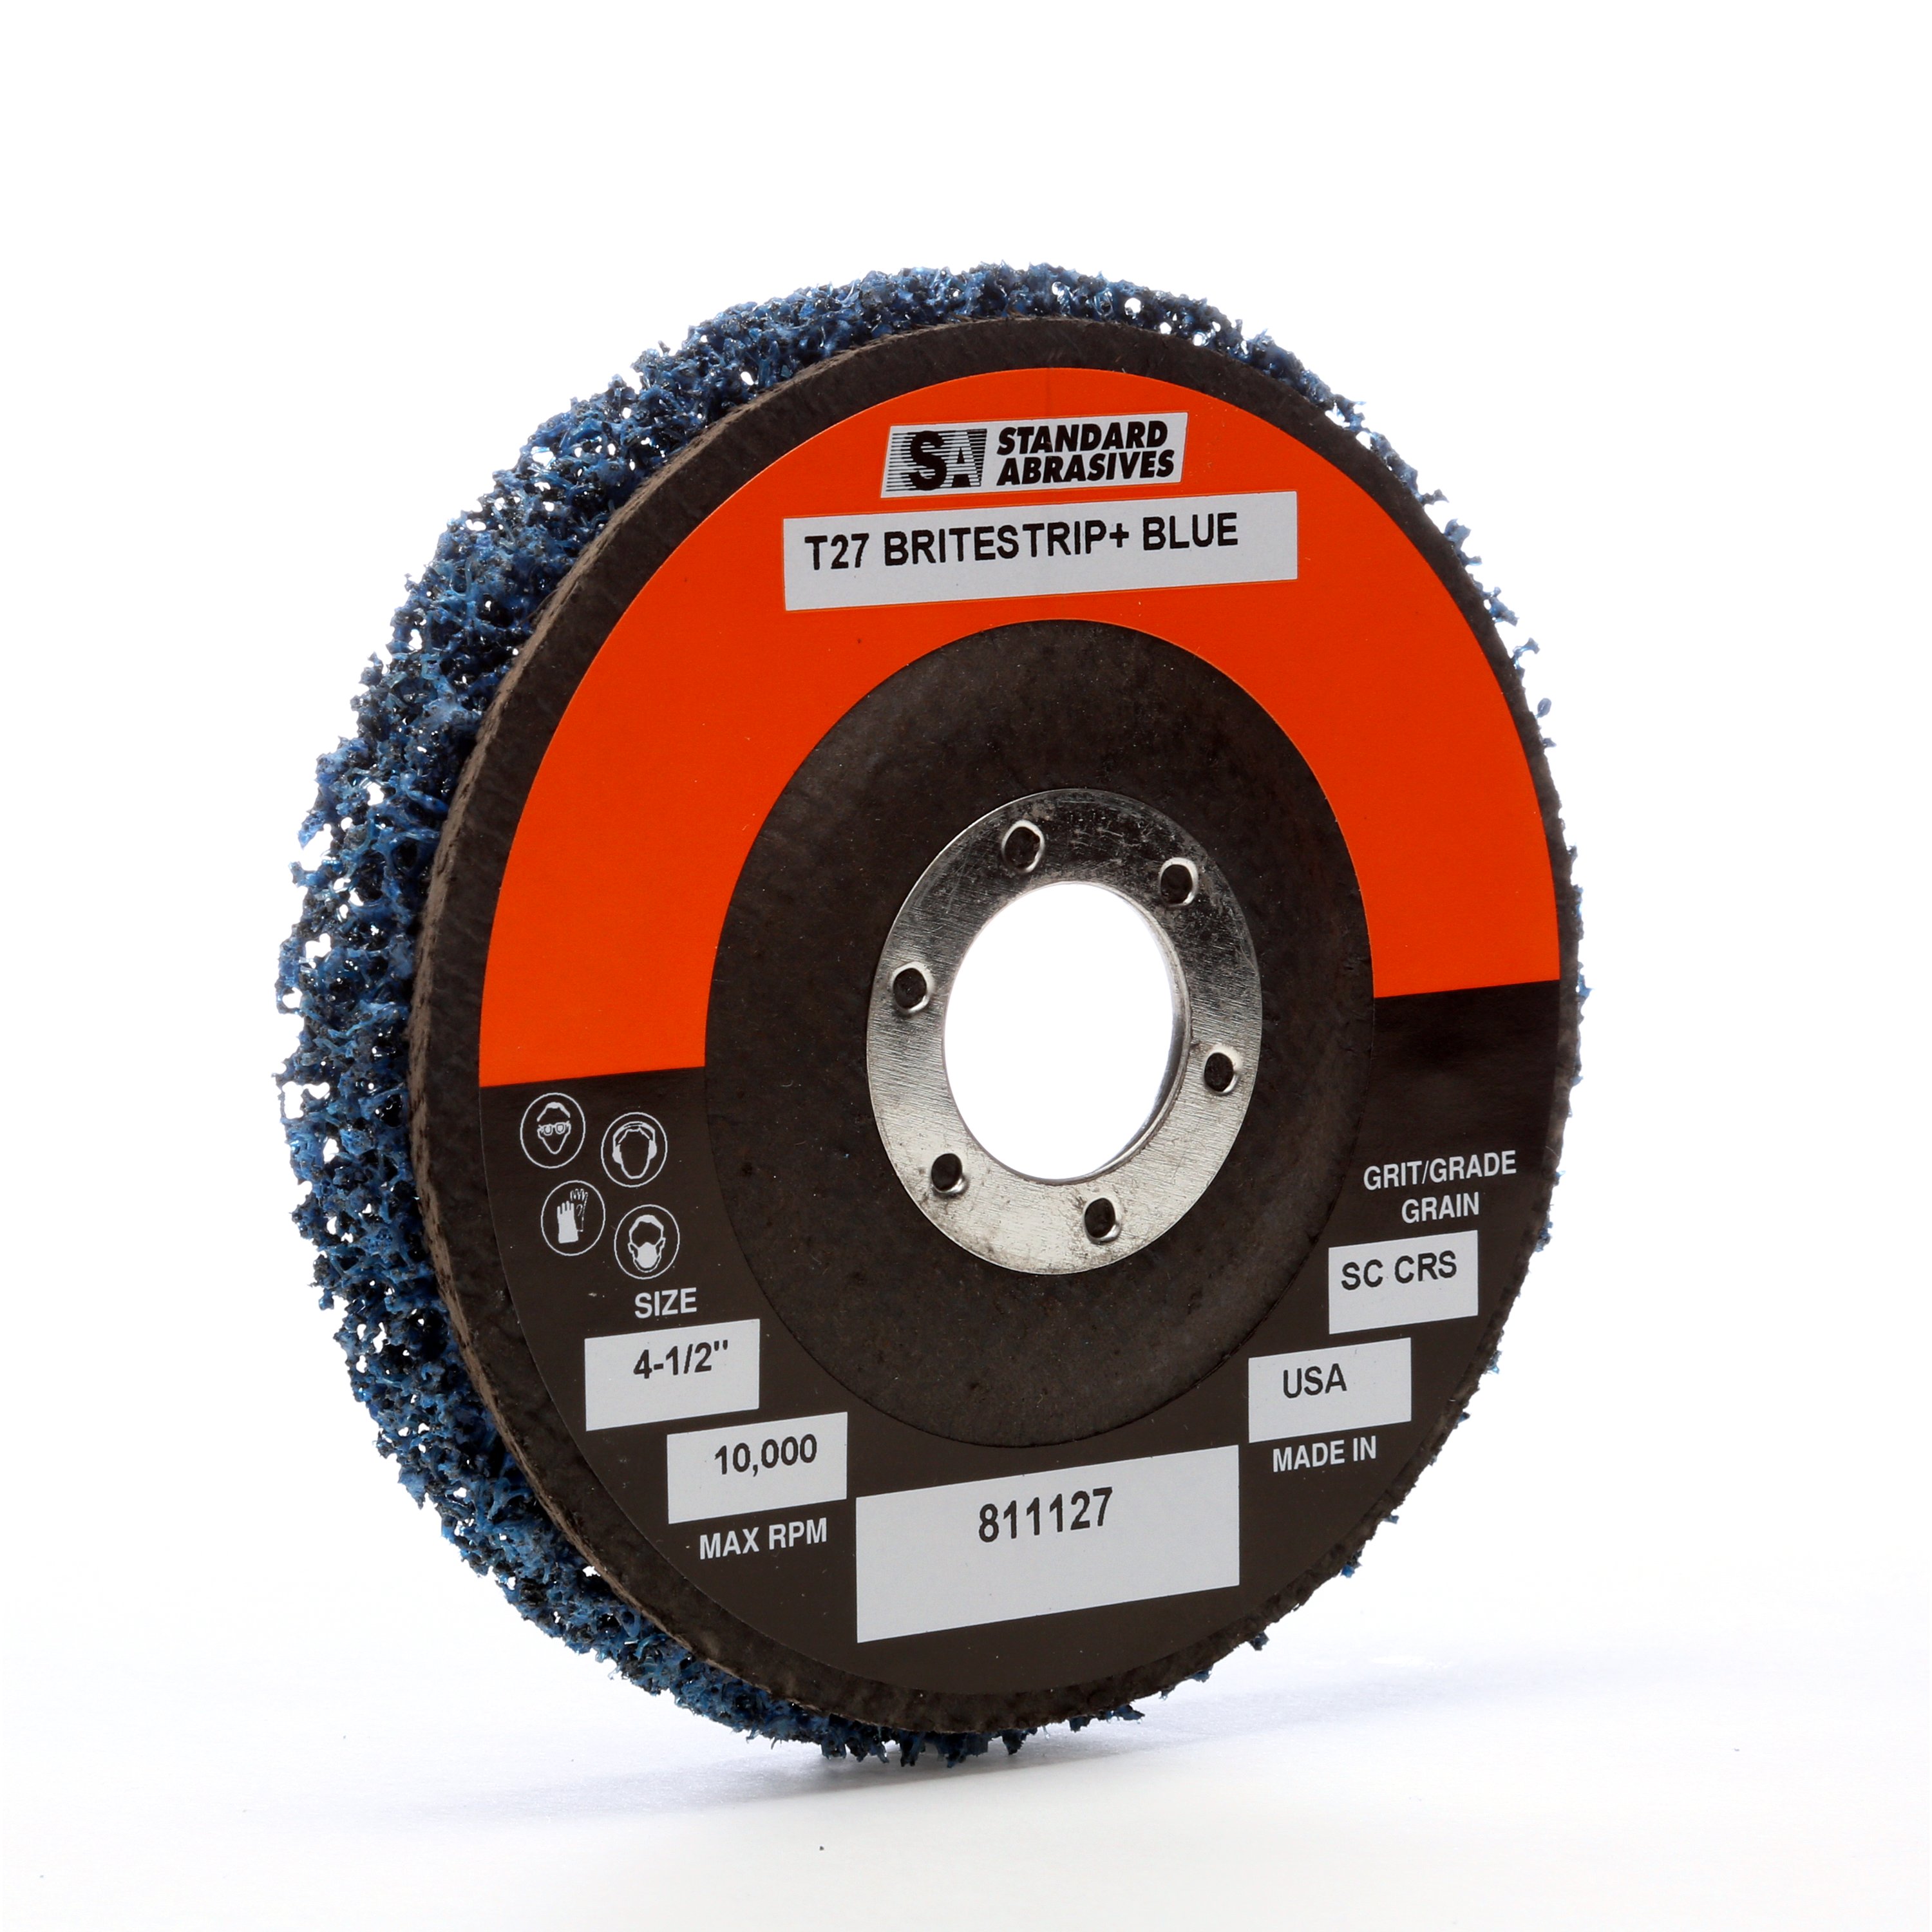 The Standard Abrasives™ Type 27 Cleaning Pro Disc was designed to take your hard work one step further and remove the unwanted blemishes that may result from welding or other applications.